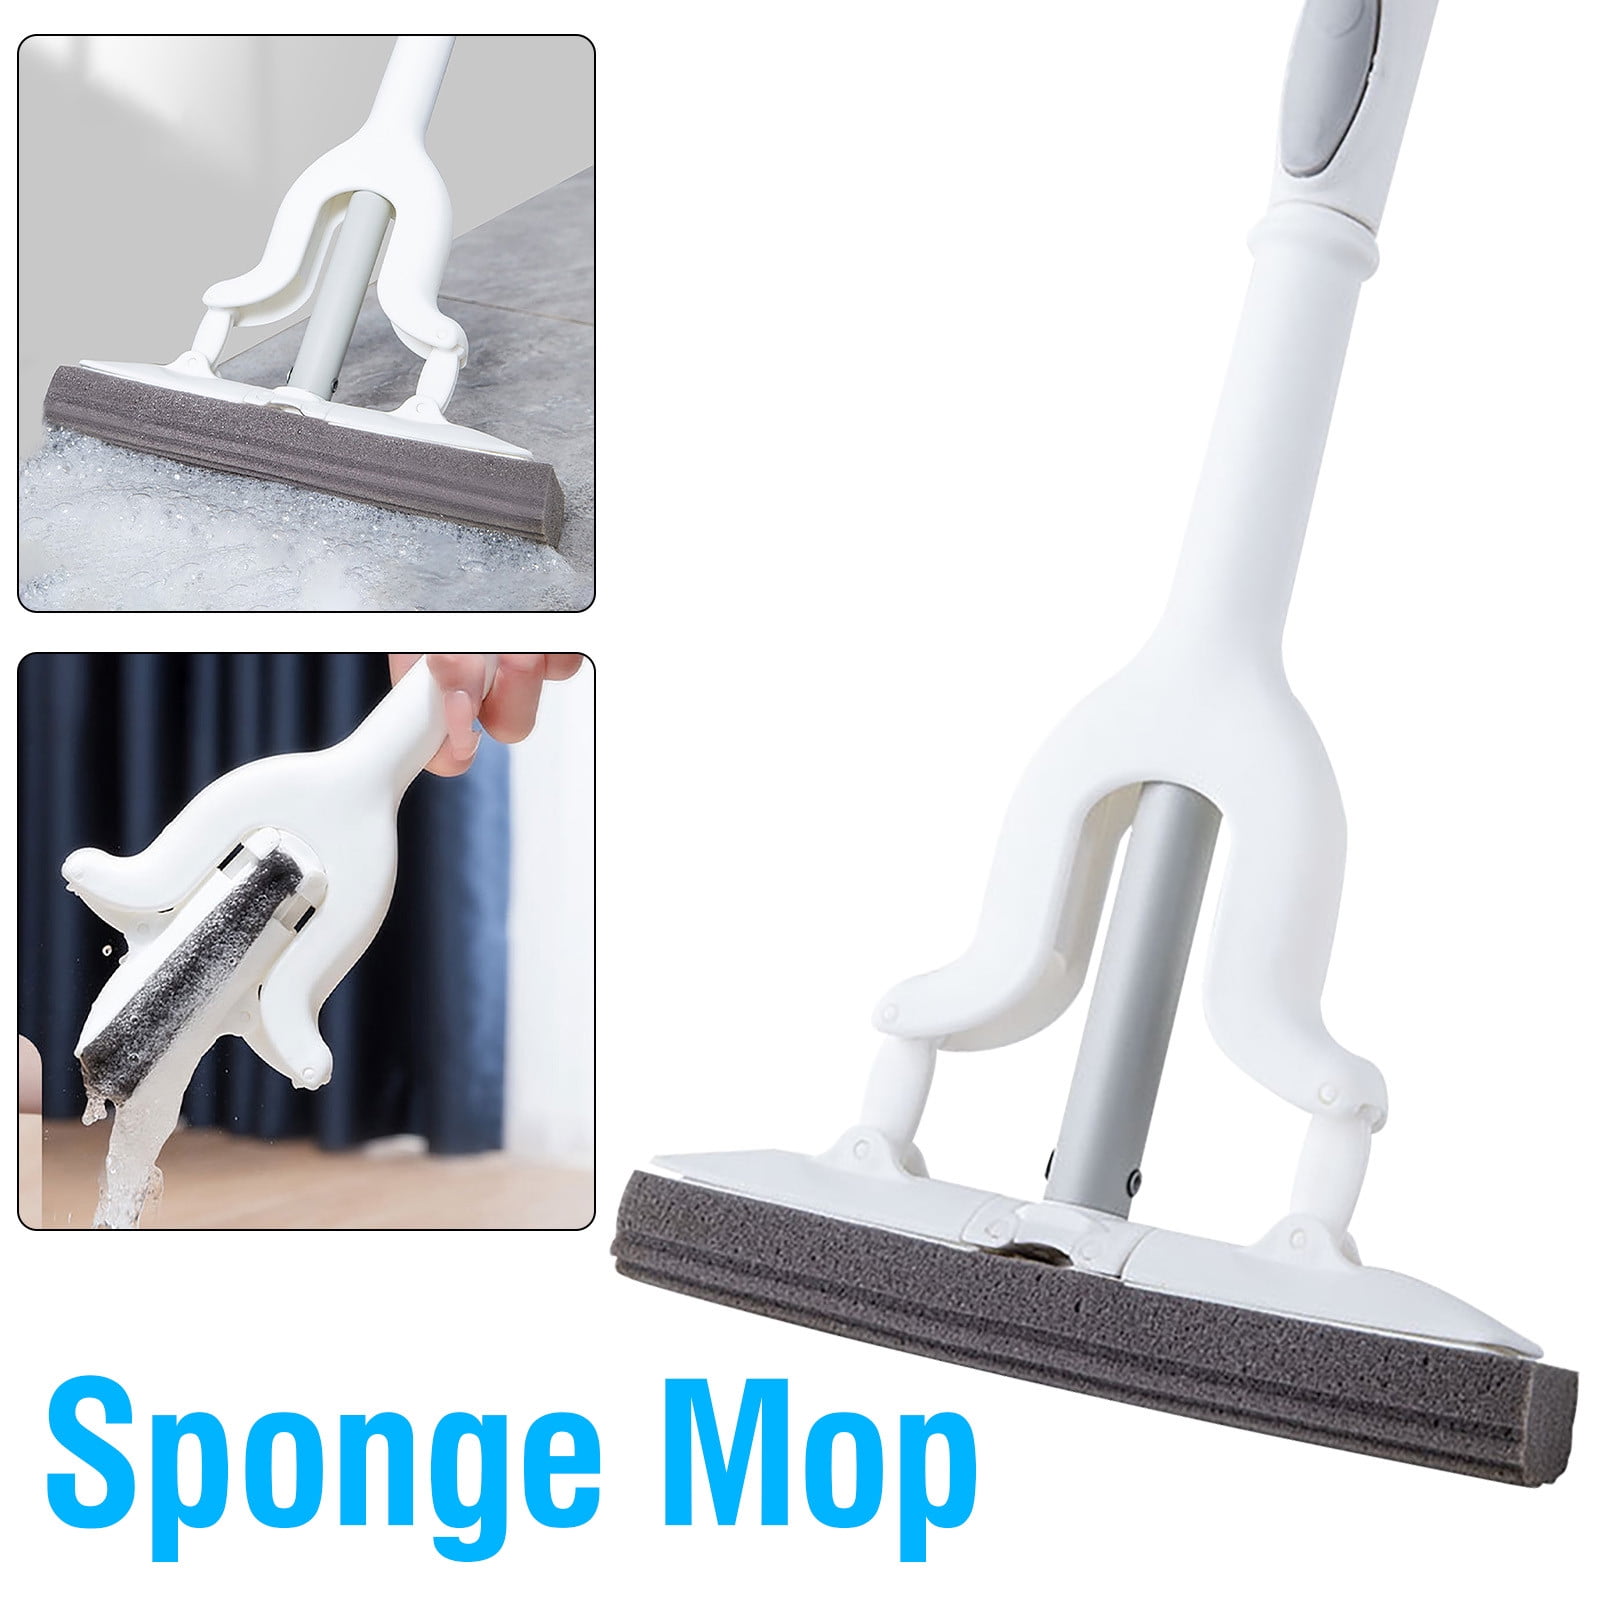 Telescopic Sponge Mop With 29cm Stainless Steel Pole, Sponge Squeegee Mop,  Foldable And Water Squeezing, Water Absorbing Mop